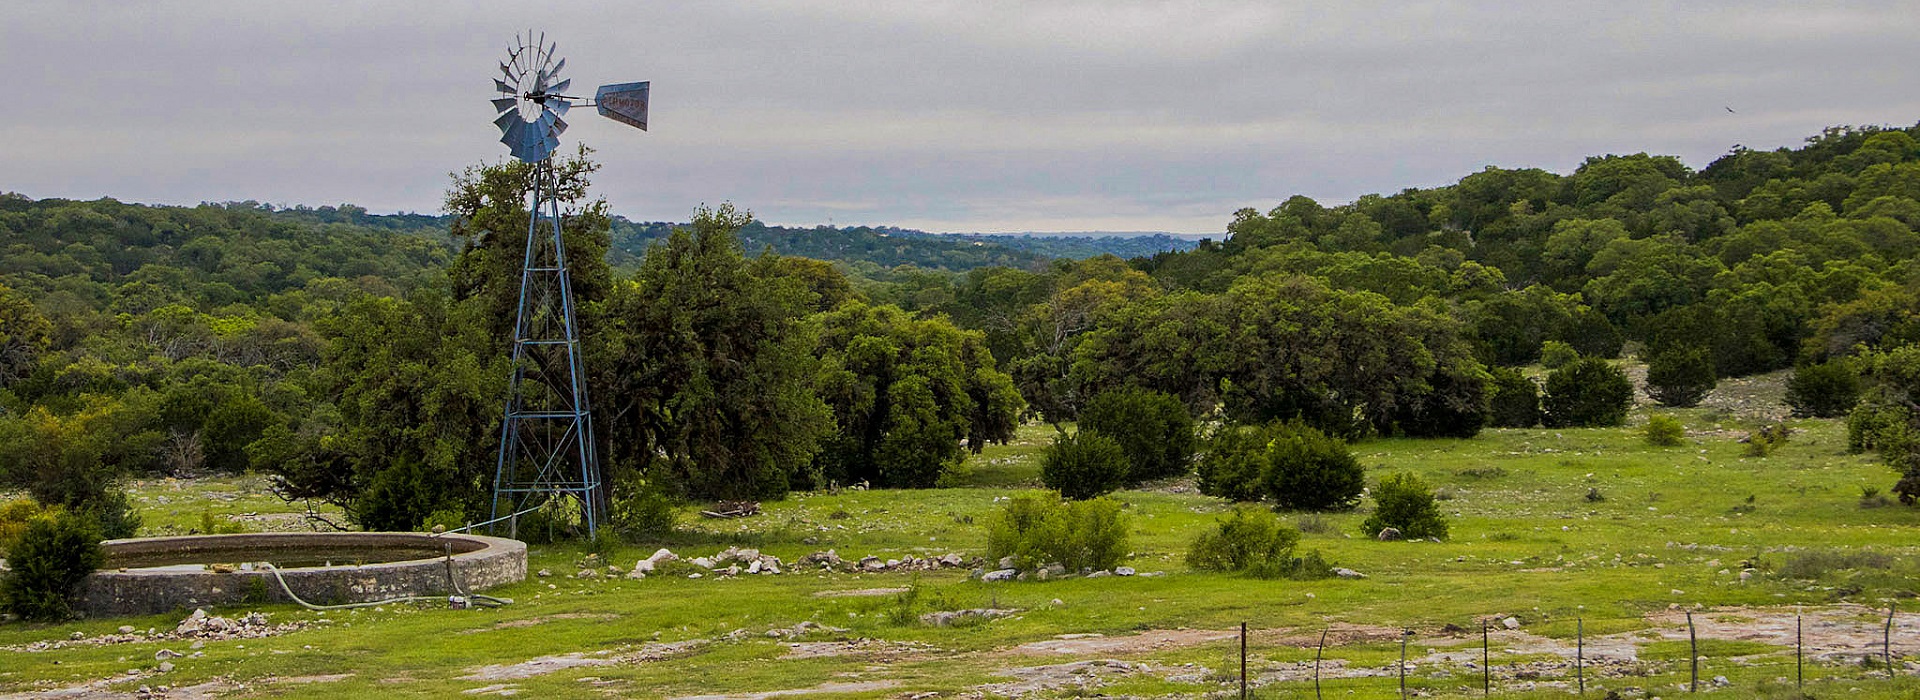 DOMINION AT REAL VALLEY HUNTING RANCH FOR SALE - WIND MILL